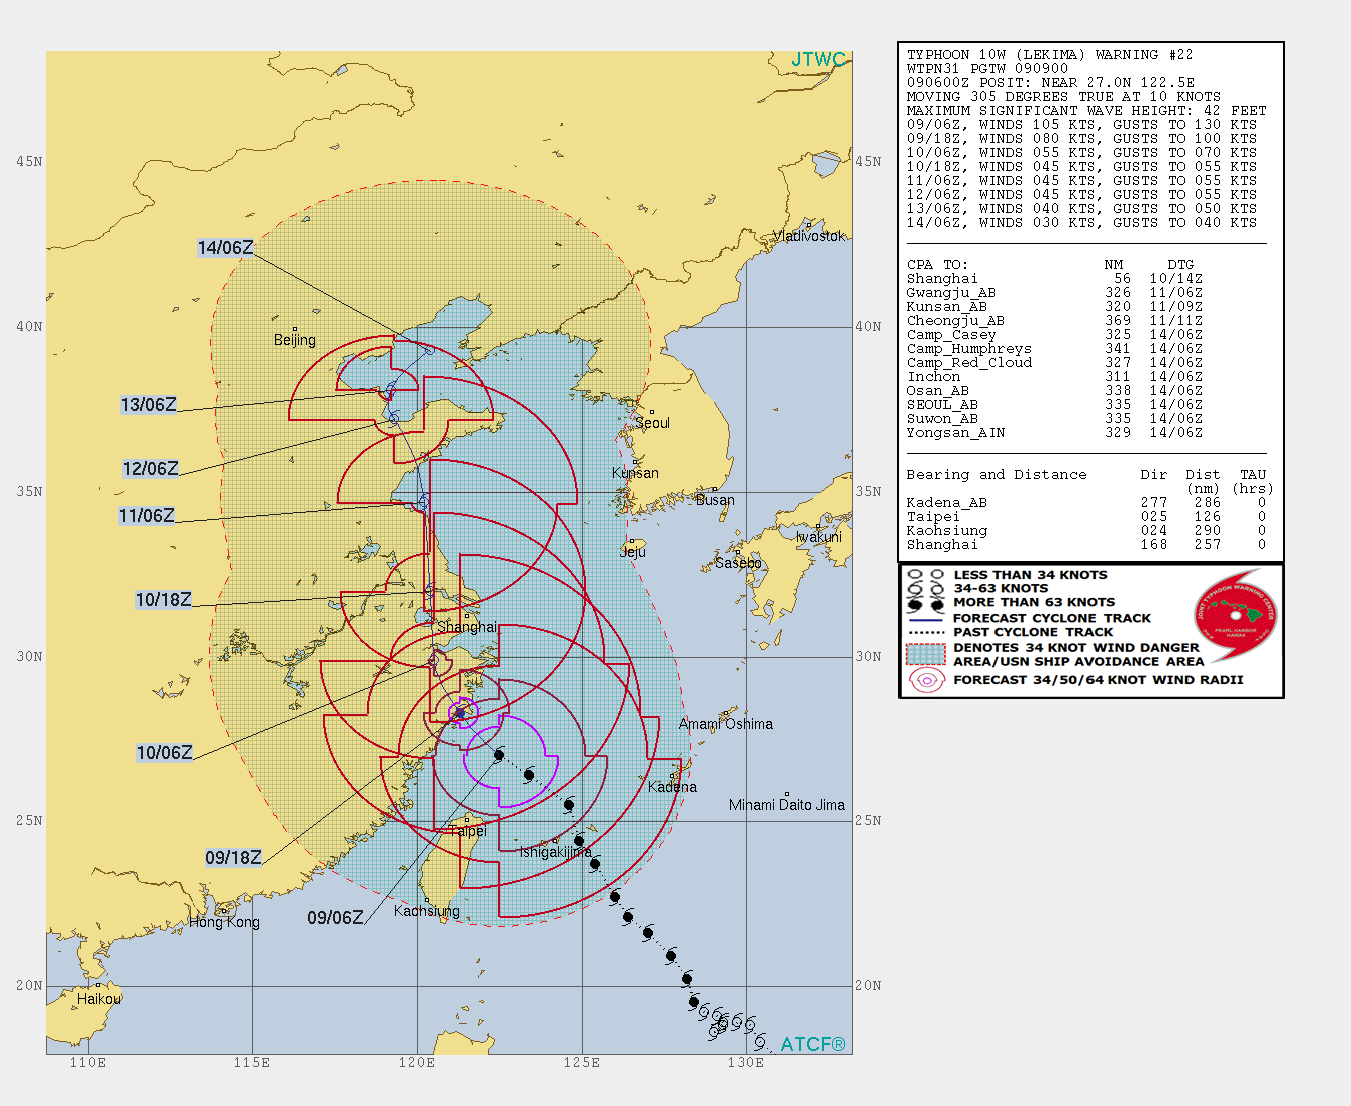 10W: WARNING 22: FORECAST TO TRACK CLOSE TO THE WEST OF SHANGHAI IN 24H BUT A MUCH WEAKENED INTENSITY